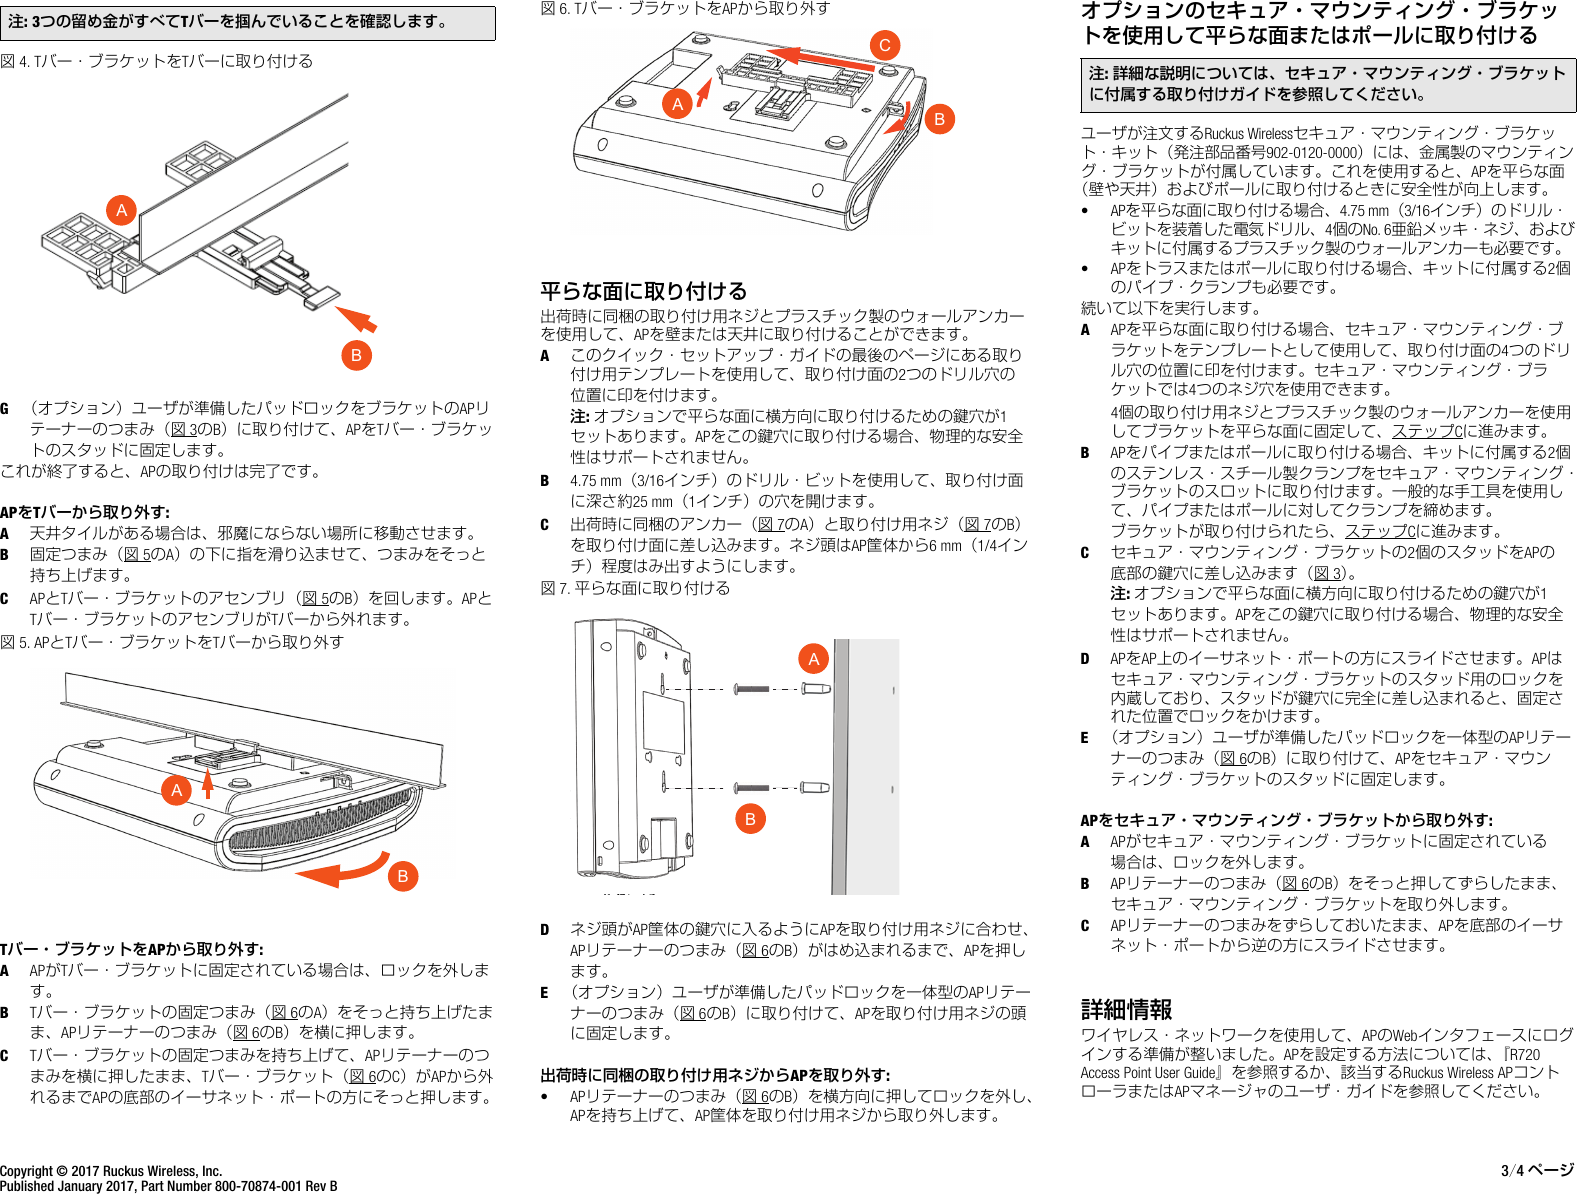 Page 3 of 4 - Ruckus R720 Access Point Quick Setup Guide Wireless Guide（Japanese Version, 日本語） R720-qsg-800-70874-001-rev B JA2